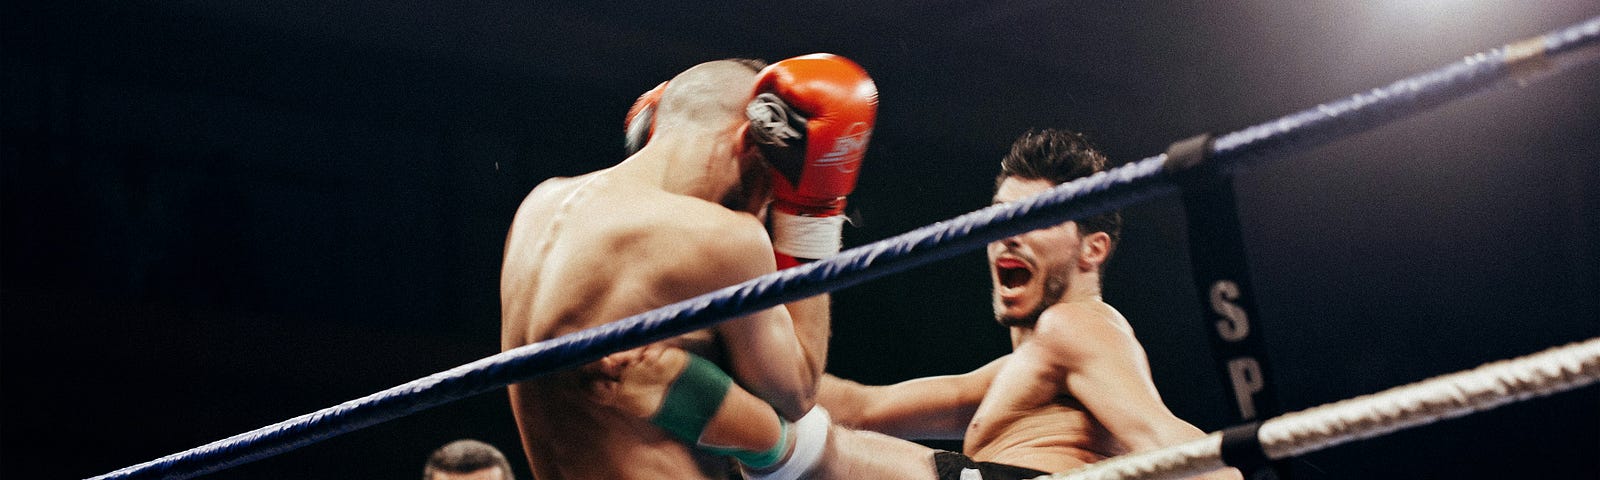 A fighter landing a roundhouse kick against their opponent’s body.